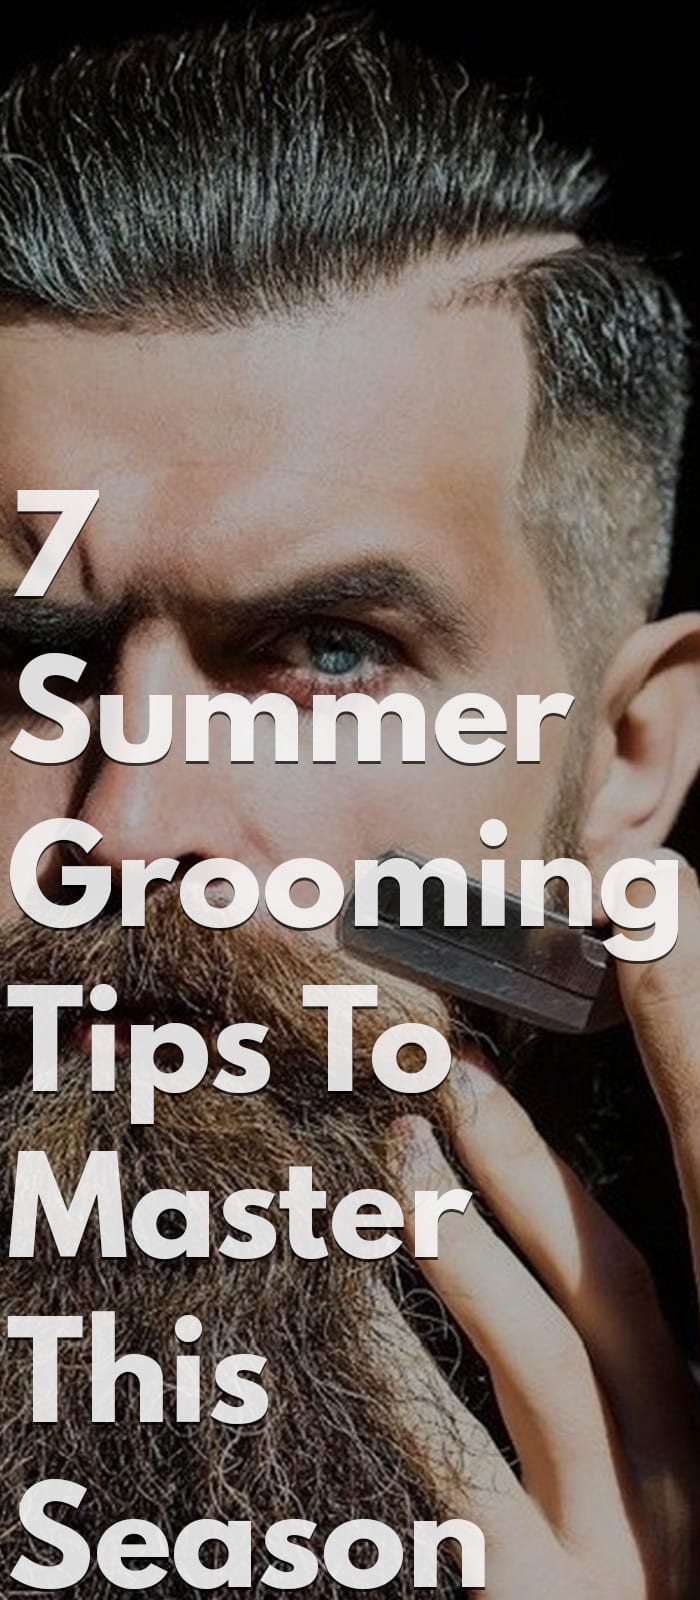 7 Summer Grooming Tips To Master